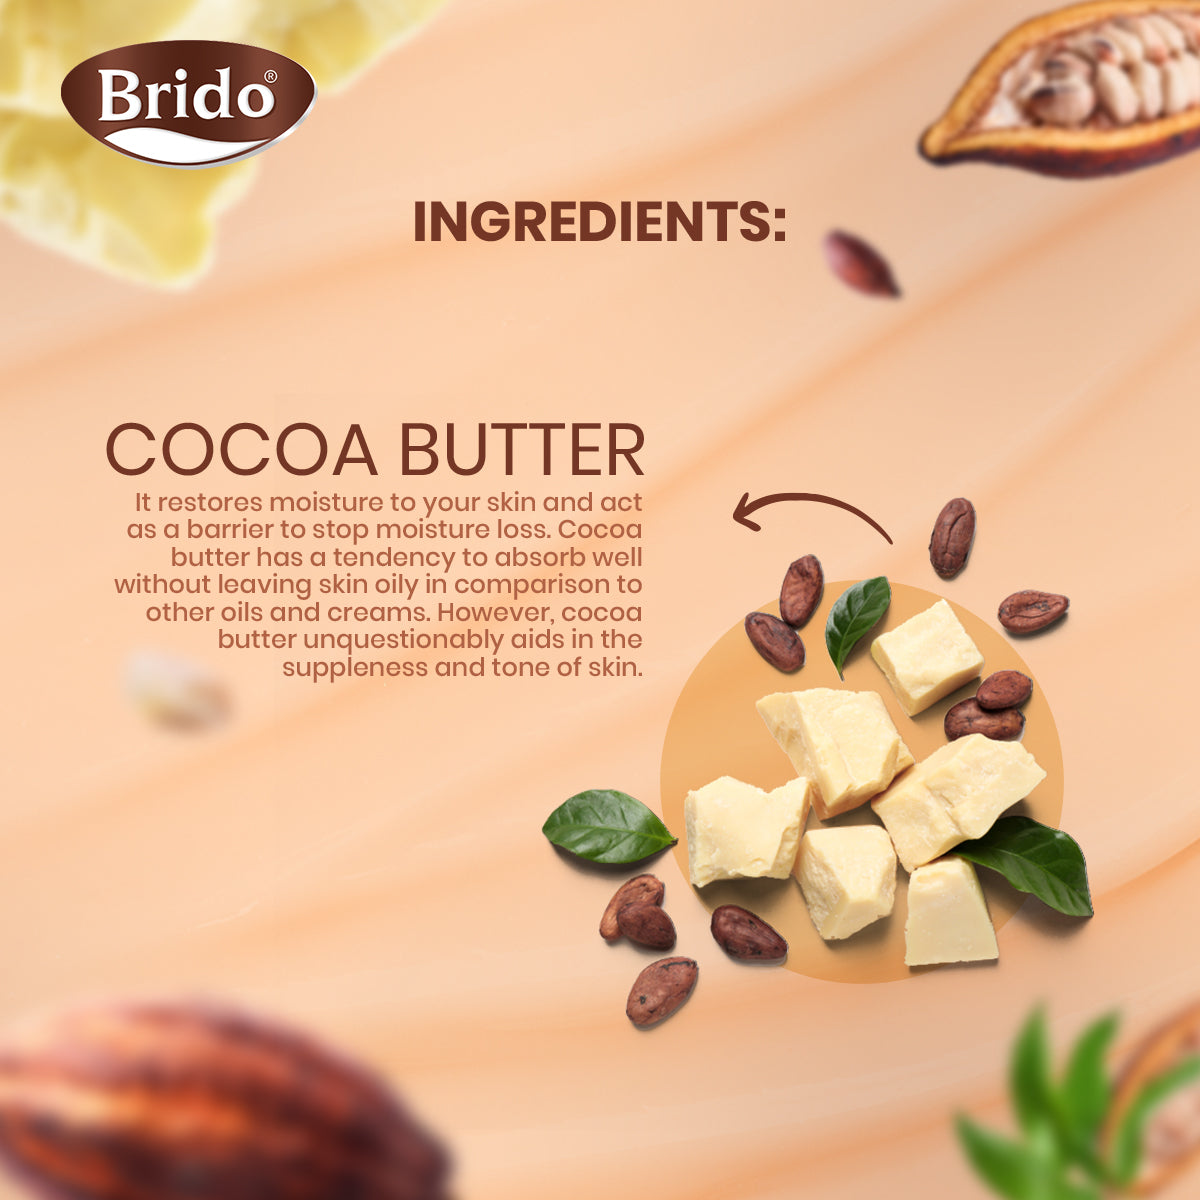 Brido Cocoa Butter Body Lotion (Skin Glow with Care) •	Heals hydrate chapped skin. •	Moisturizes the skin & gives a perfect glow. •	It reduces stretch marks and scars. •	It heals sensitive skin Cocoa butter is high in antioxidants, which help fight off free-radical damage. •	Made with natural cocoa butter. •	Non-greasy formula Gives perfect glow as well as softness. •	Locks the moisture in the skin.